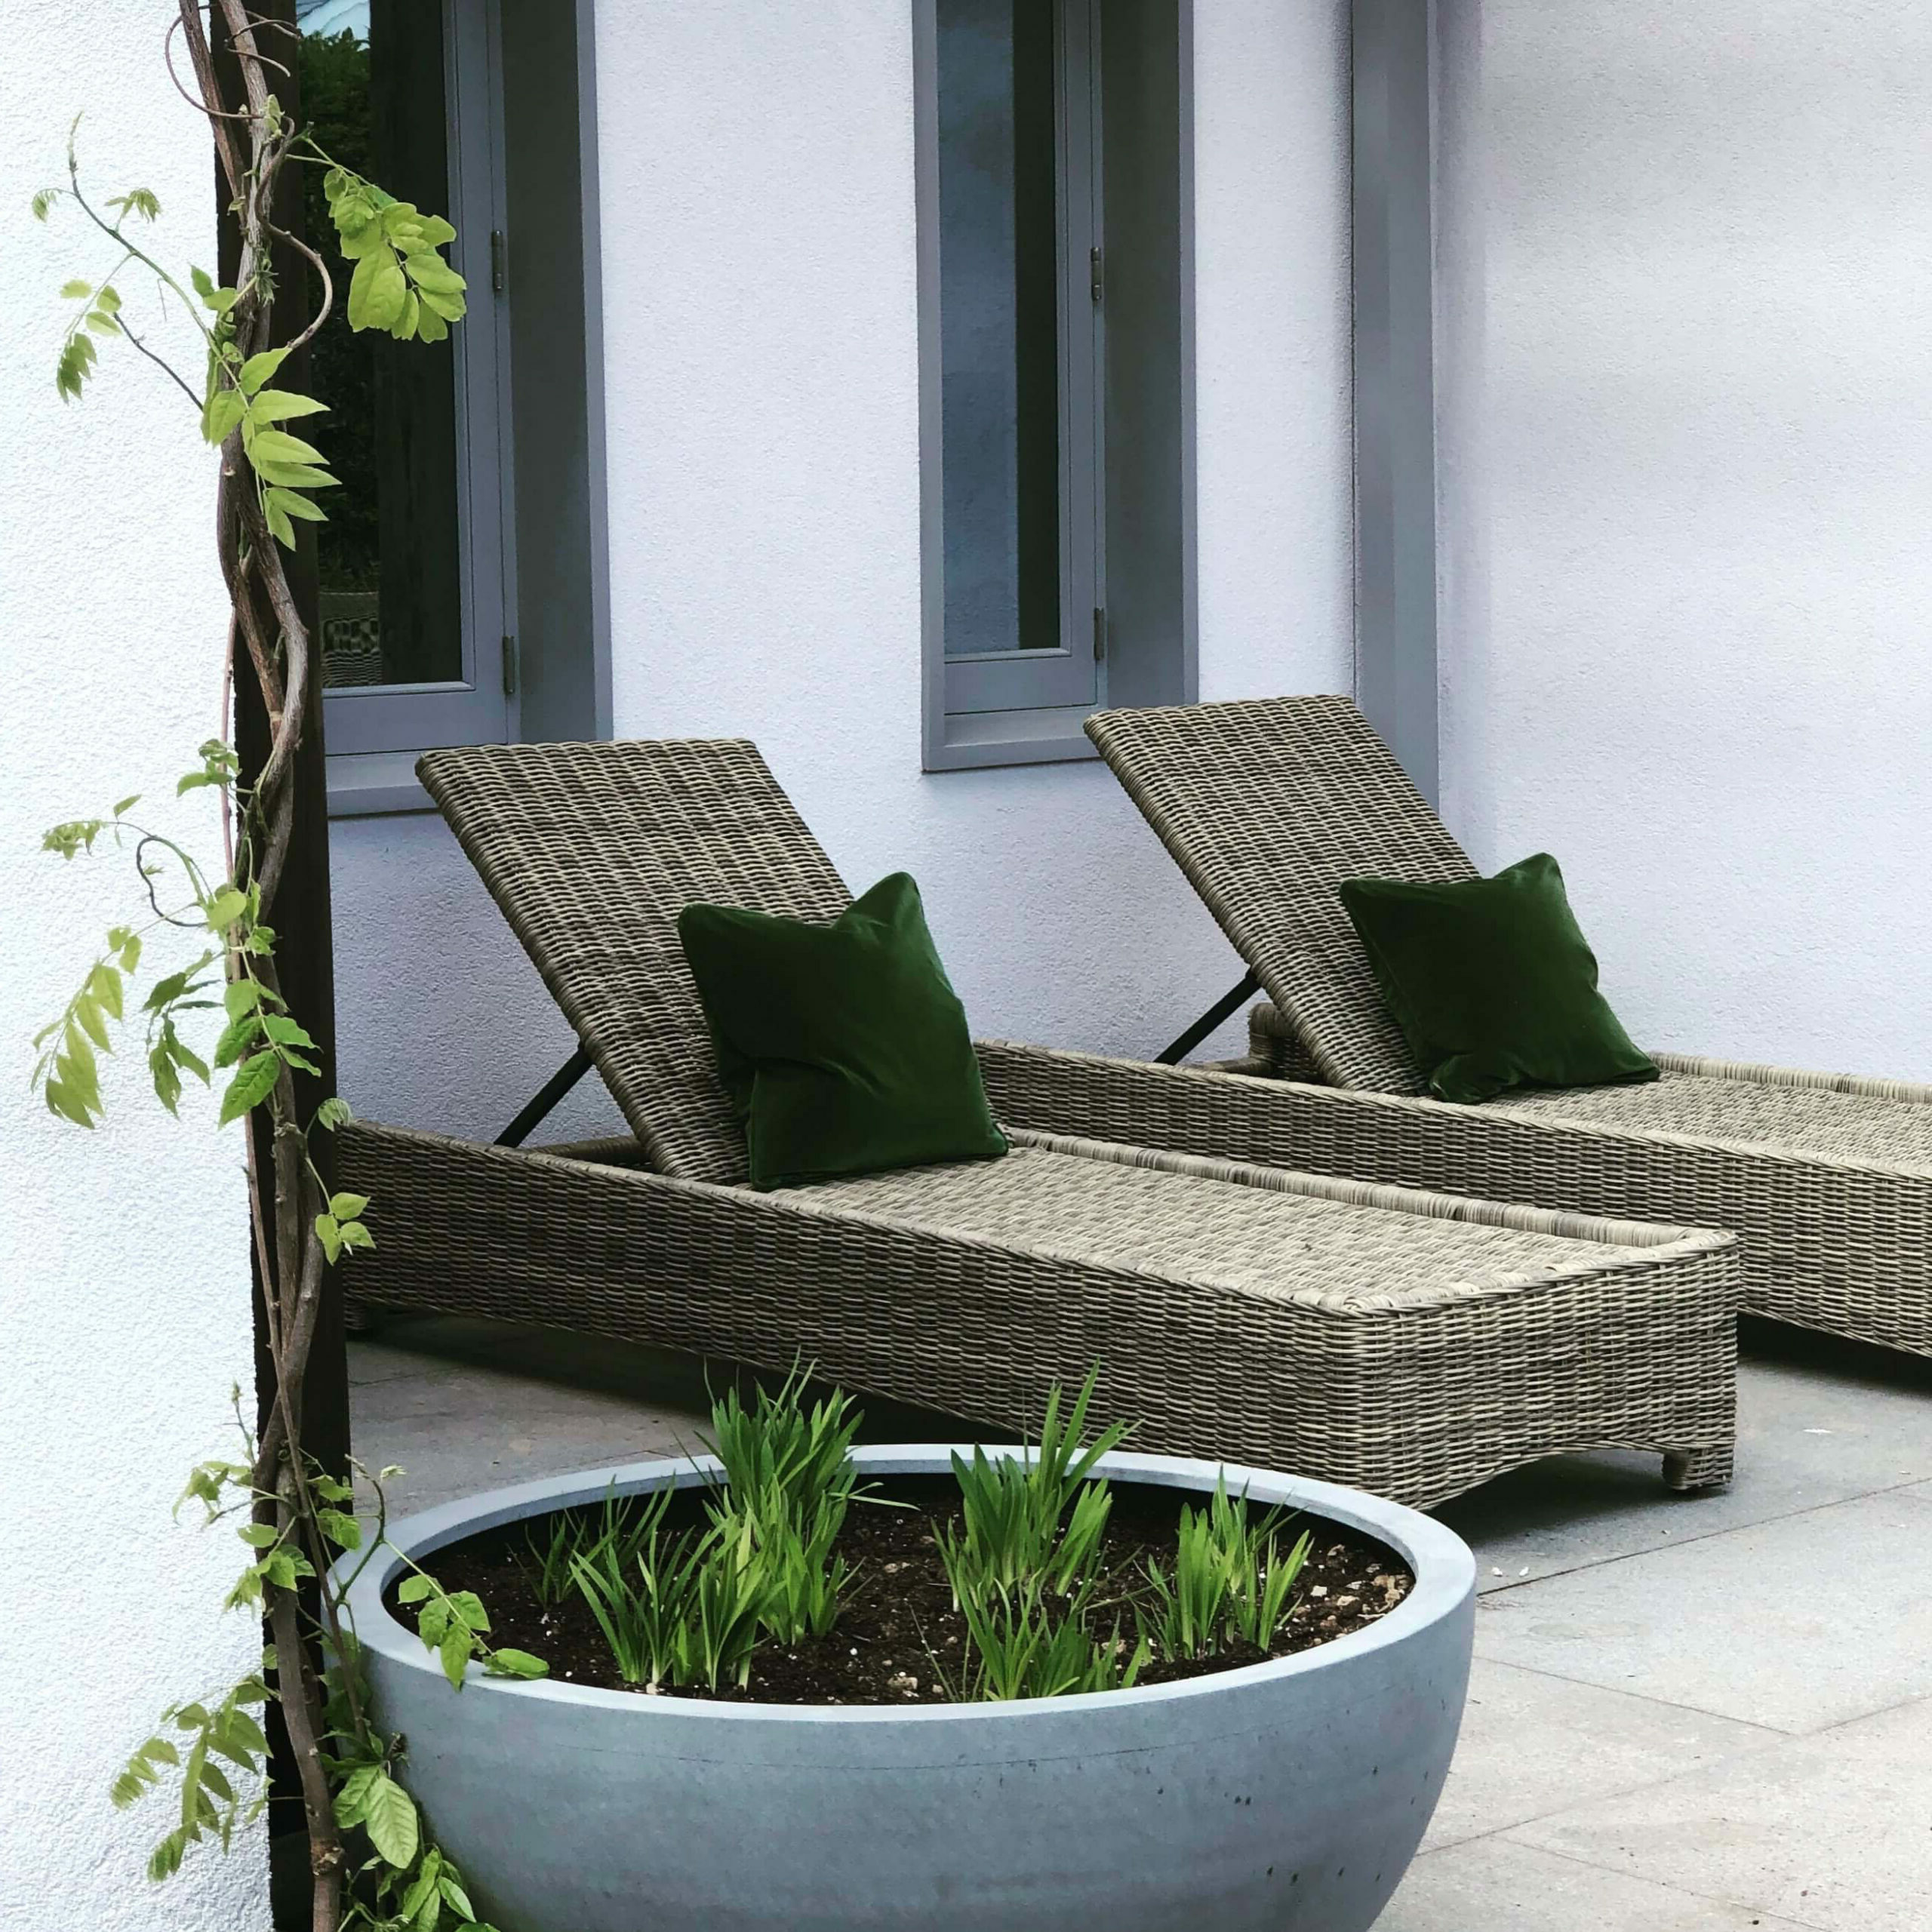 sun loungers with velvet cushions in a cornwall garden design